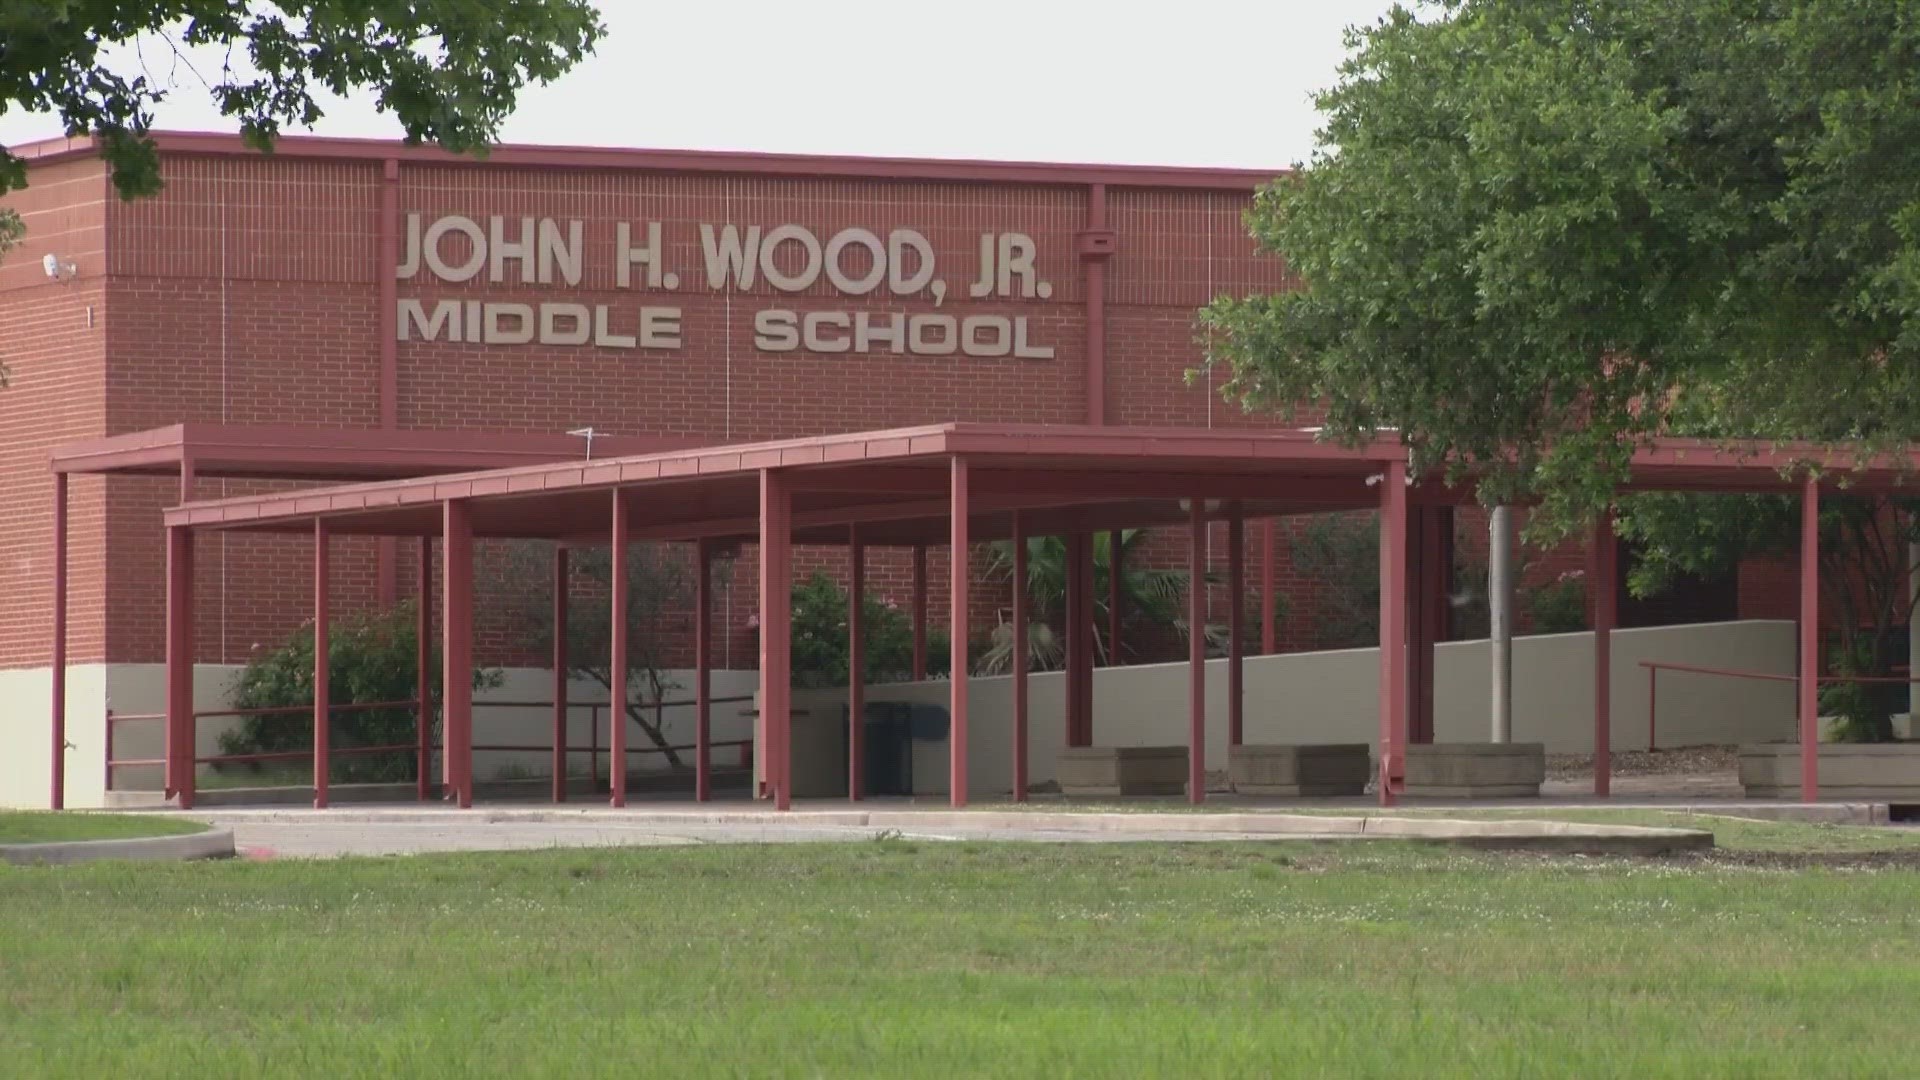 The middle school teacher was conducting active shooter training on her own without authorization, the school's principal says.